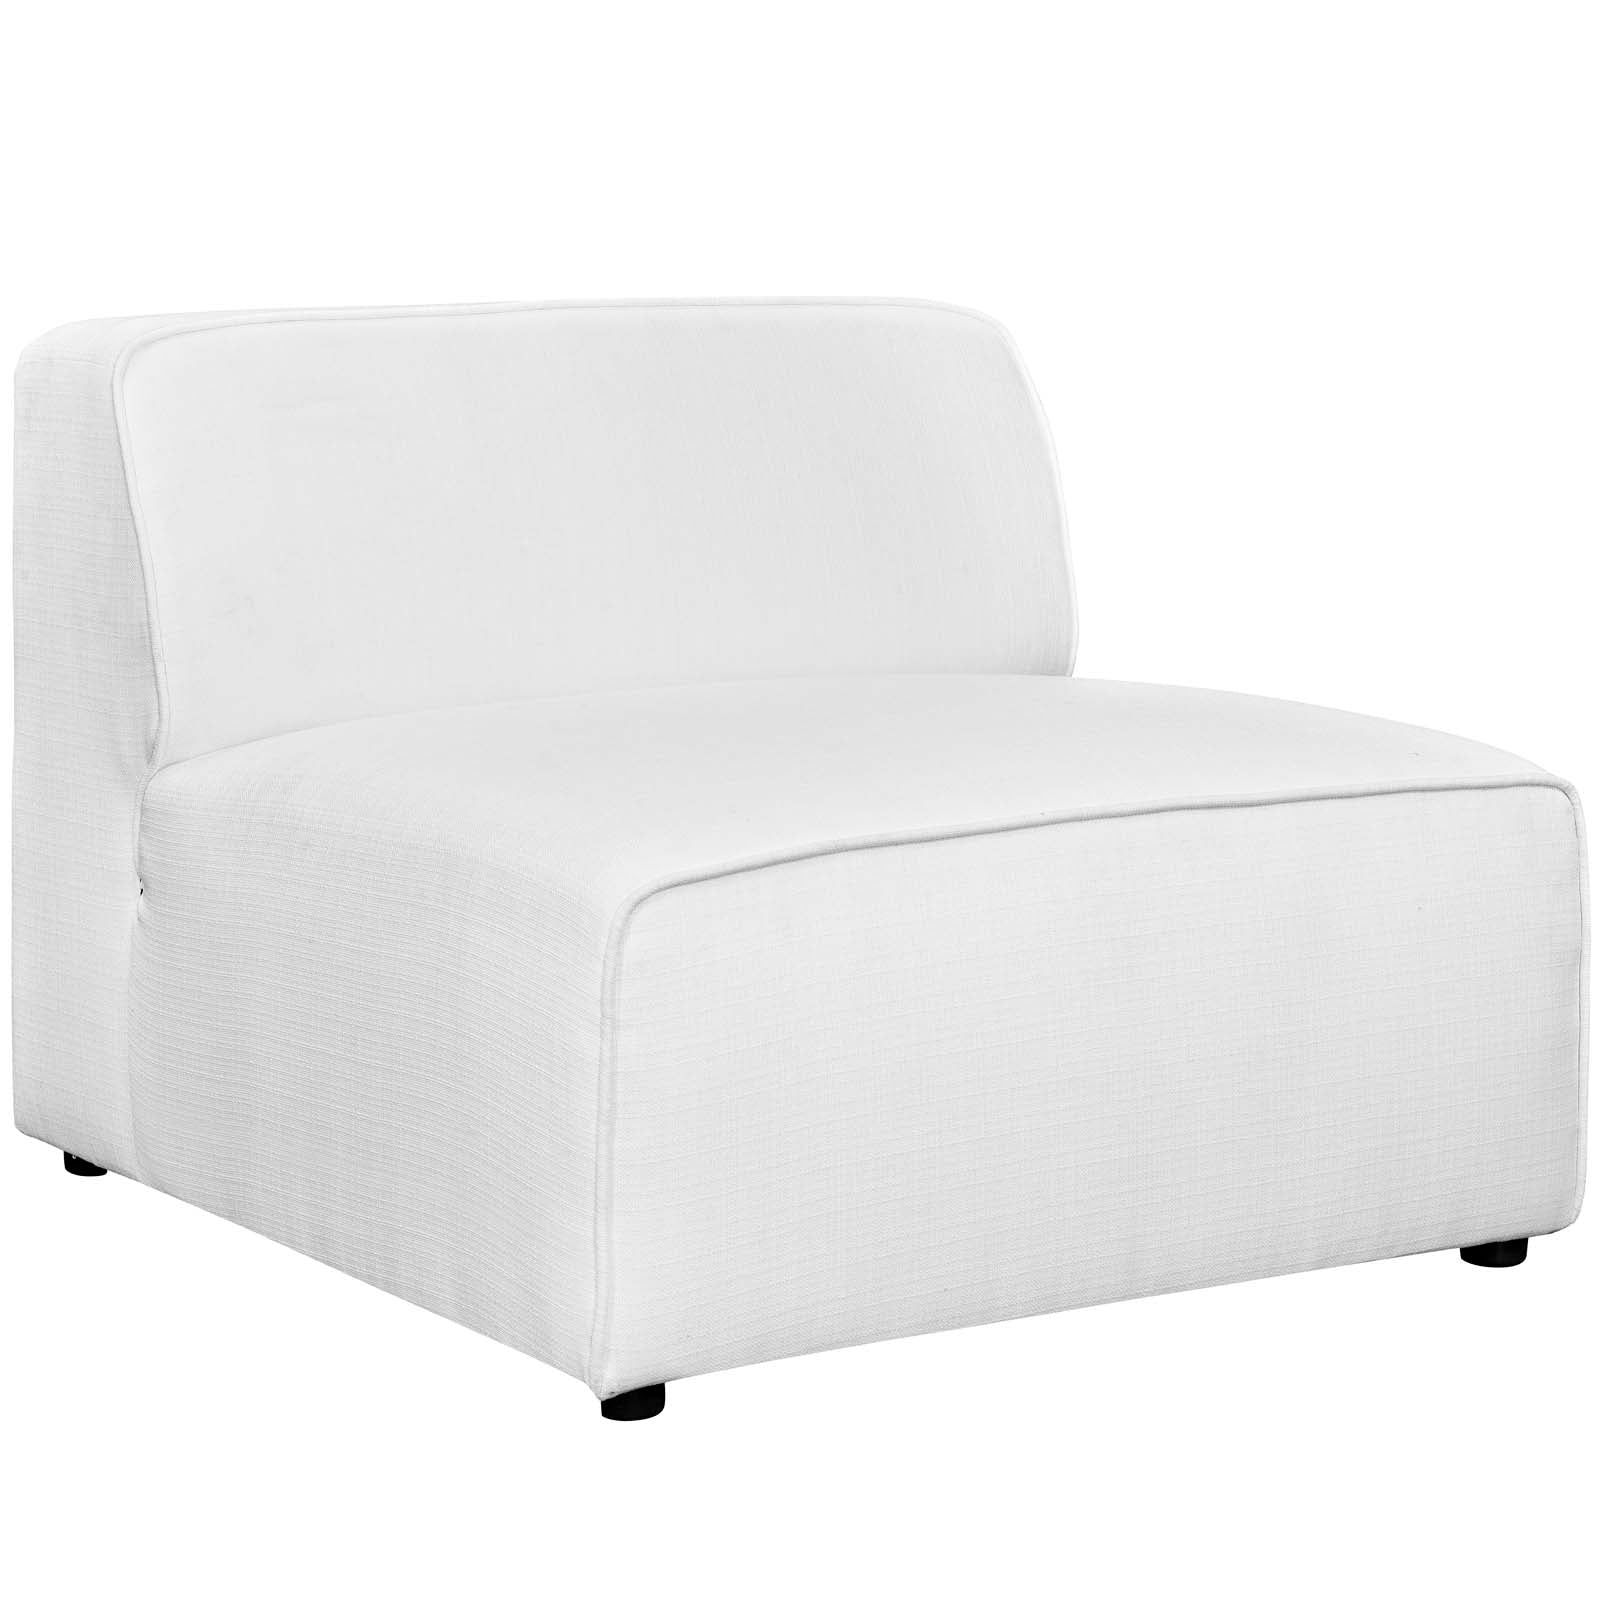 Modway Sectional Sofas - Mingle 7 Piece Upholstered Fabric Sectional Sofa Set White 149"